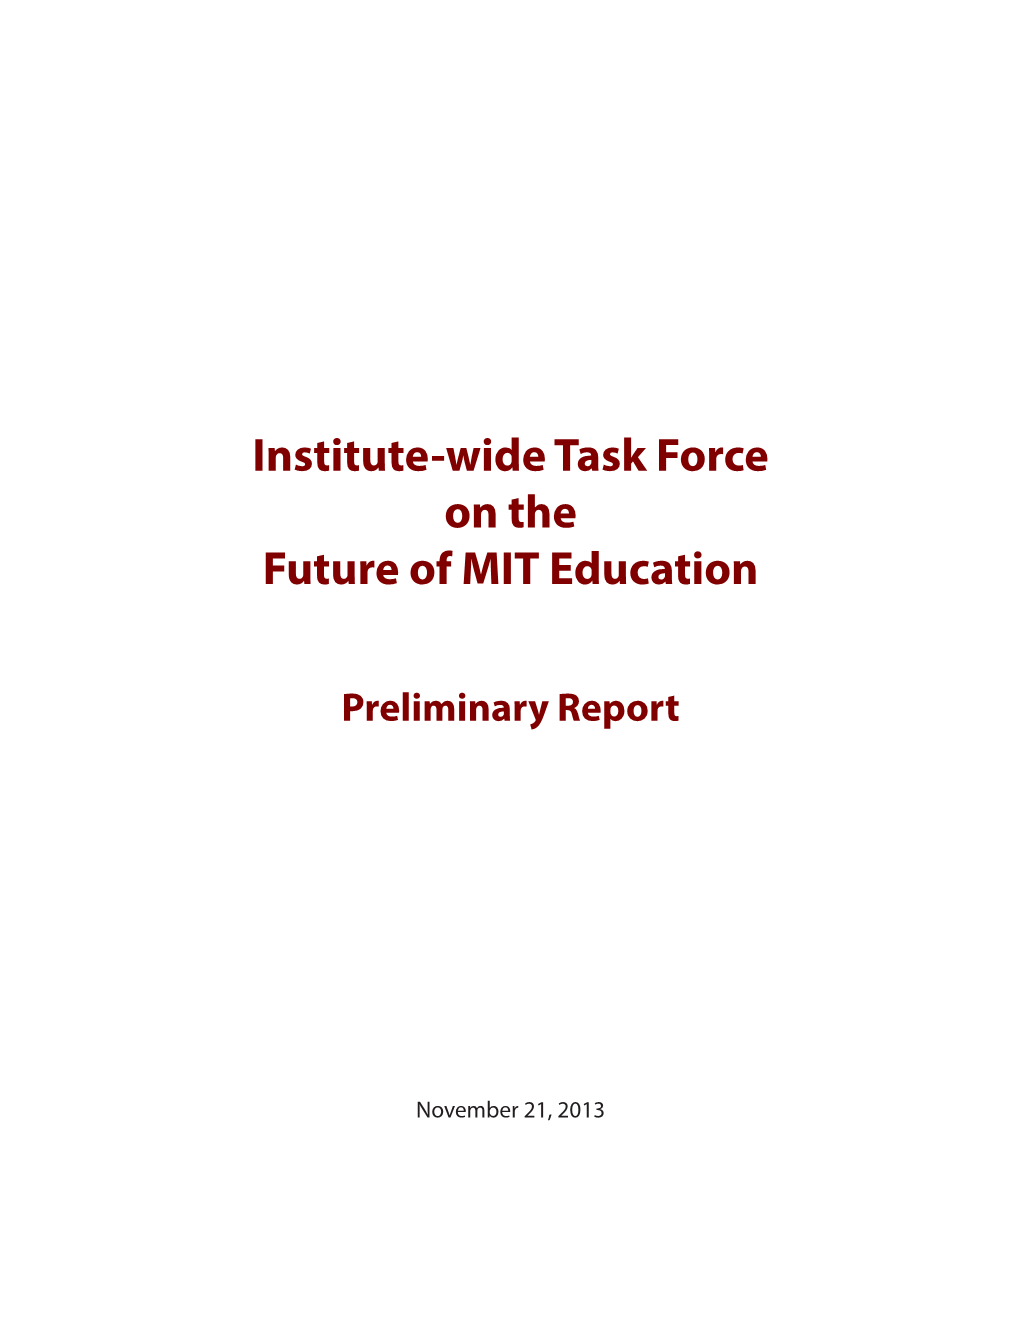 Institute-Wide Task Force on the Future of MIT Education, Preliminary Report